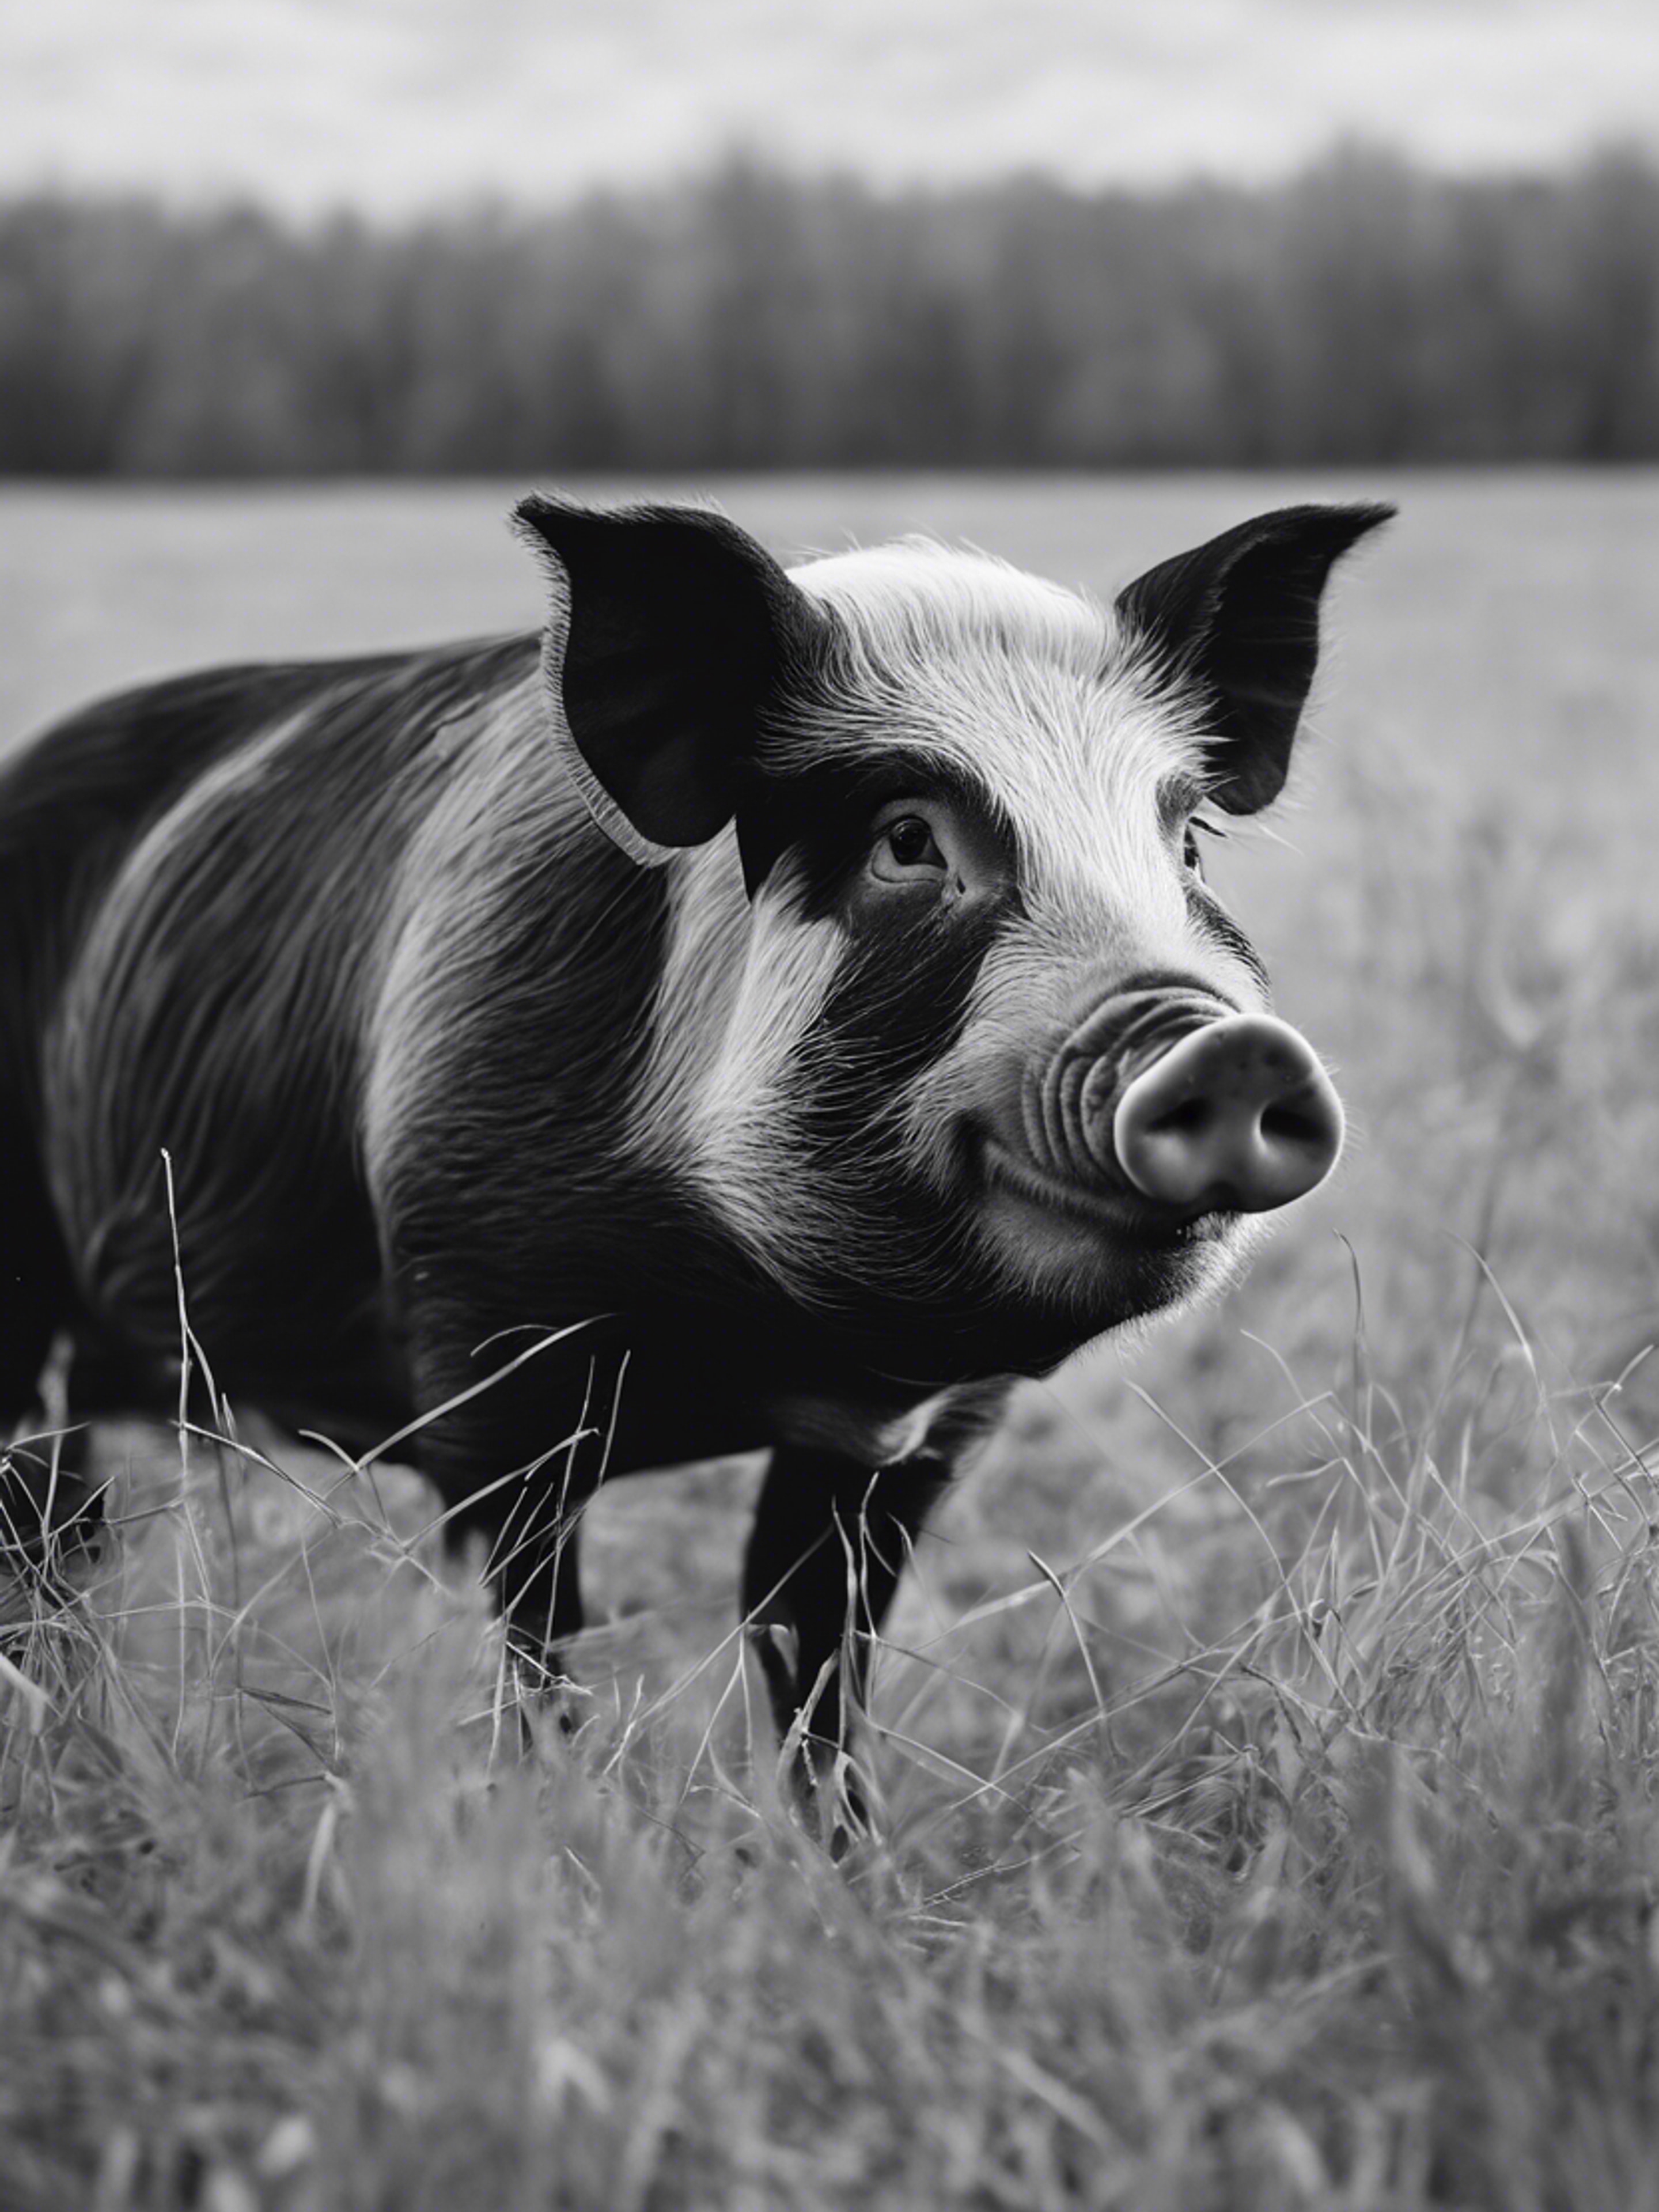 A black and white pig with clean fur, captured in a country meadow during tranquility of winter. Taustakuva[700eb497dc0e43a8b530]